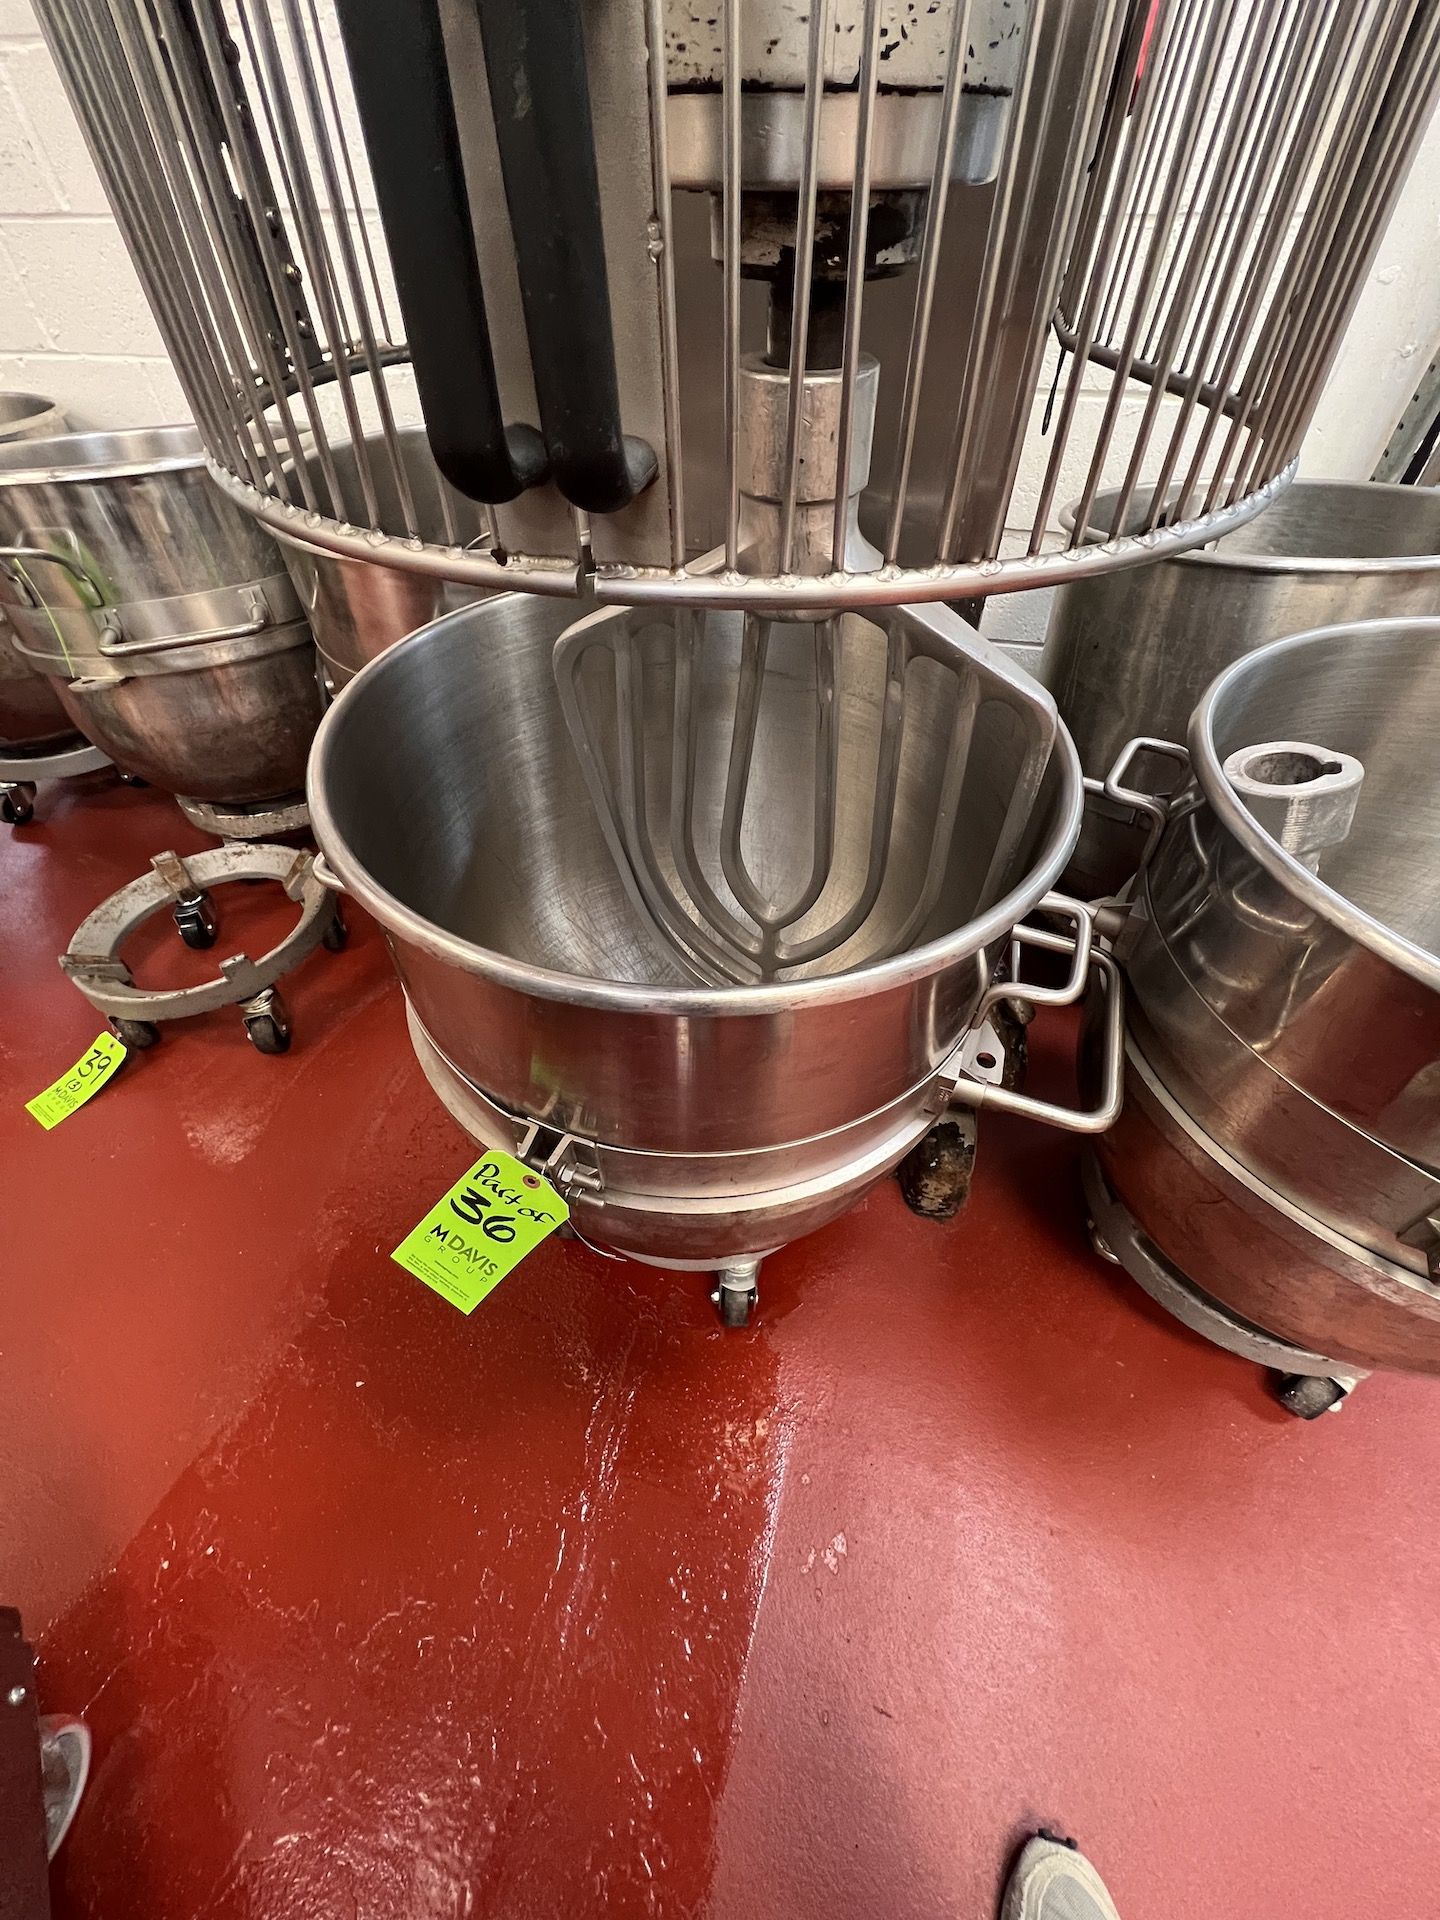 HOBART MIXER, MODEL Q1401, S/N 11-340-0, 140 QUART, WITH BEATER ATTACHMENT, MIXING BOWL AND DOLLY - Image 5 of 8